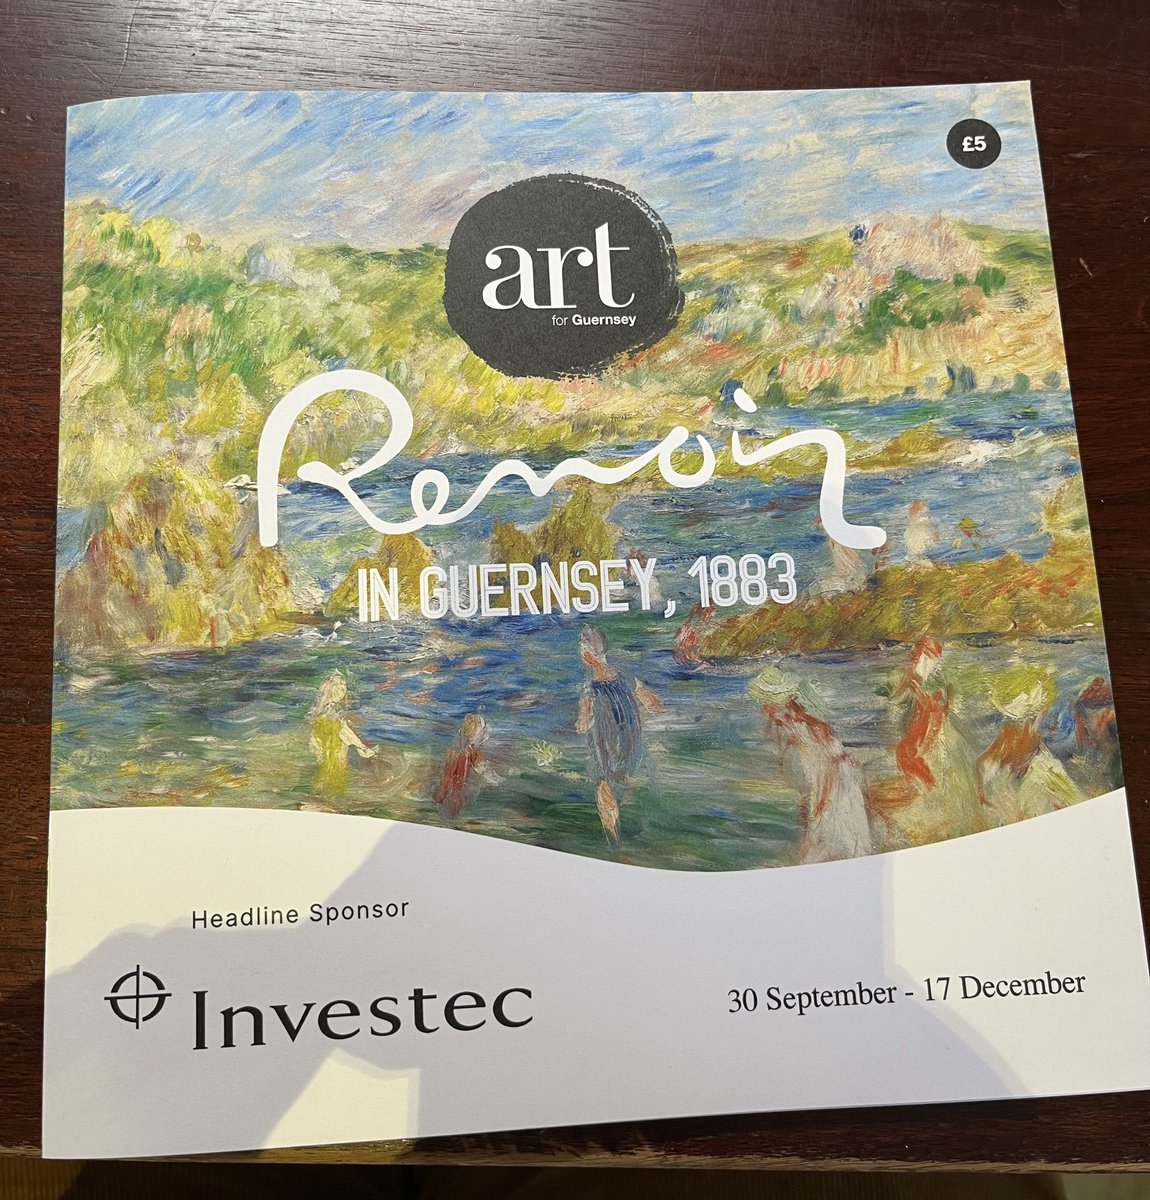 The #Renoir exhibition is in its final week @GuernseyMuseums - do see it if you can. A great achievement from @ArtforGuernsey.